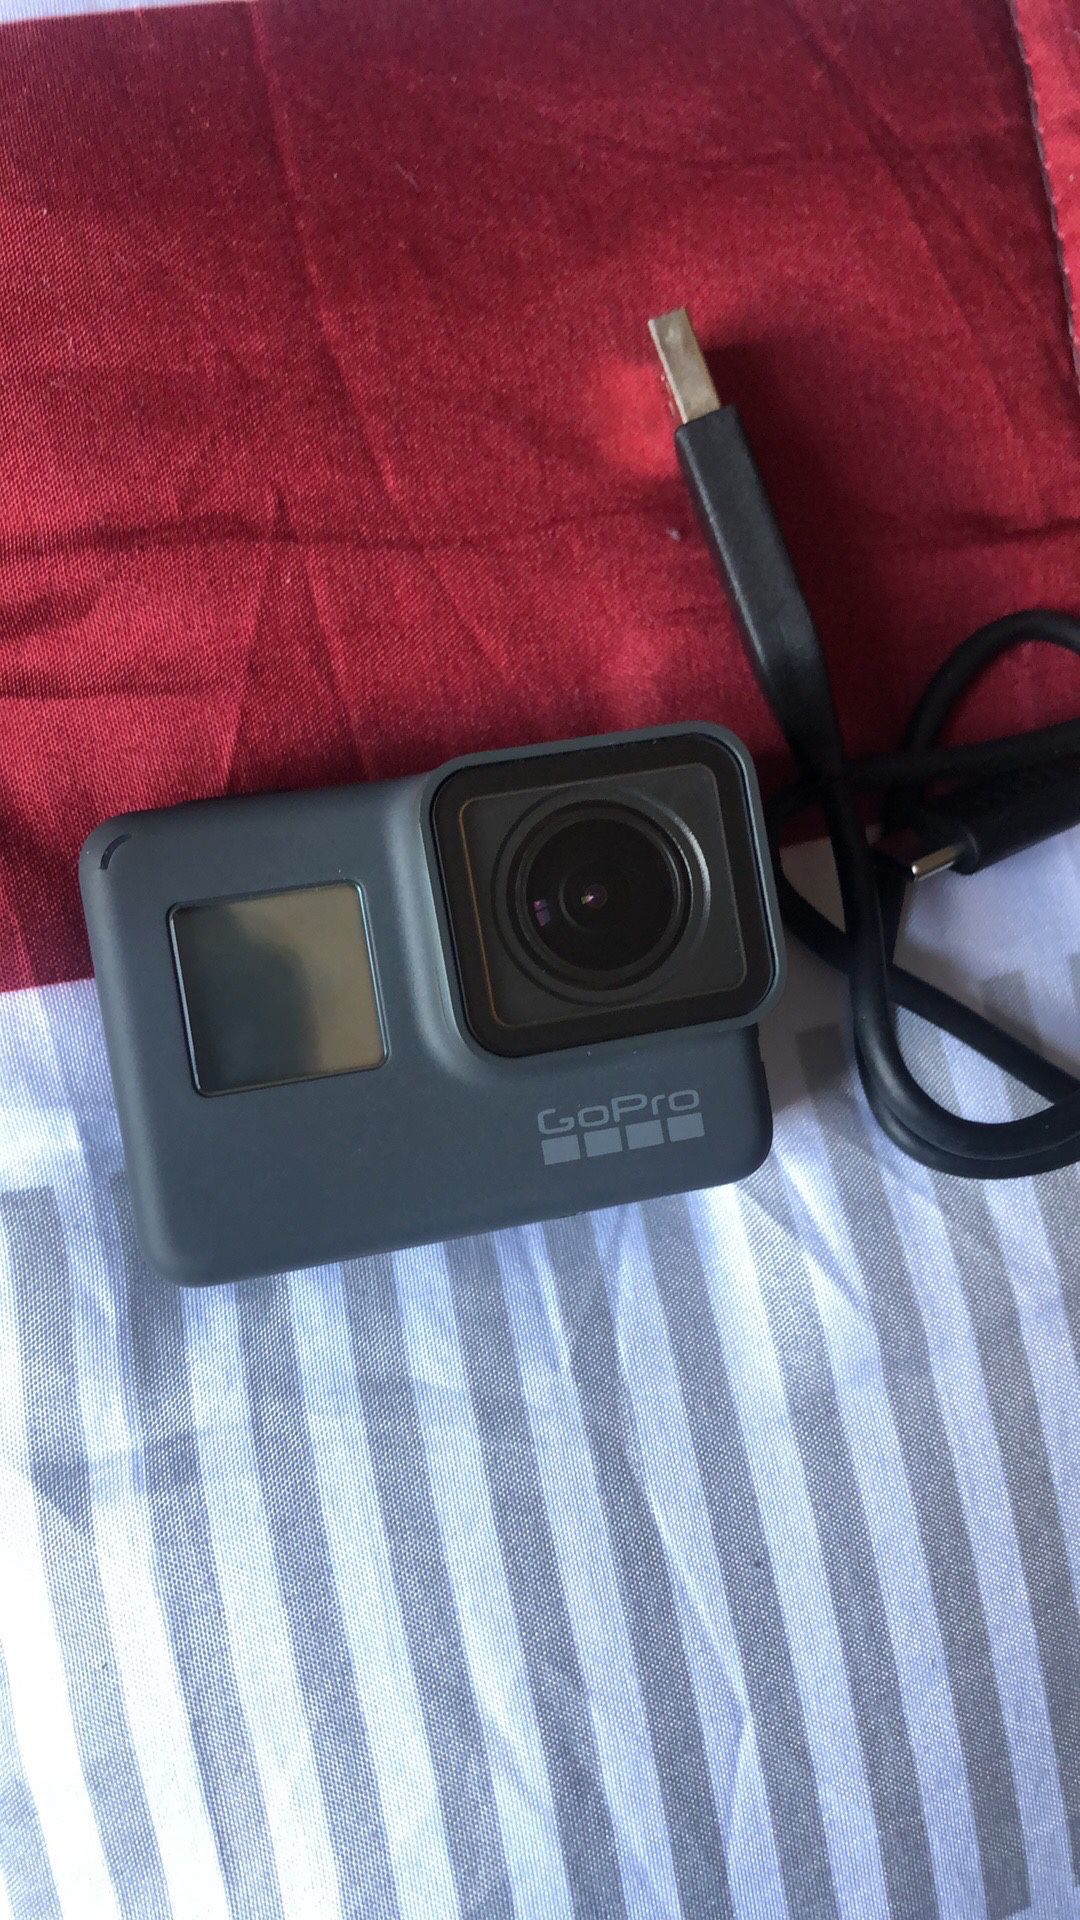 Mint condition GoPro 2018 model